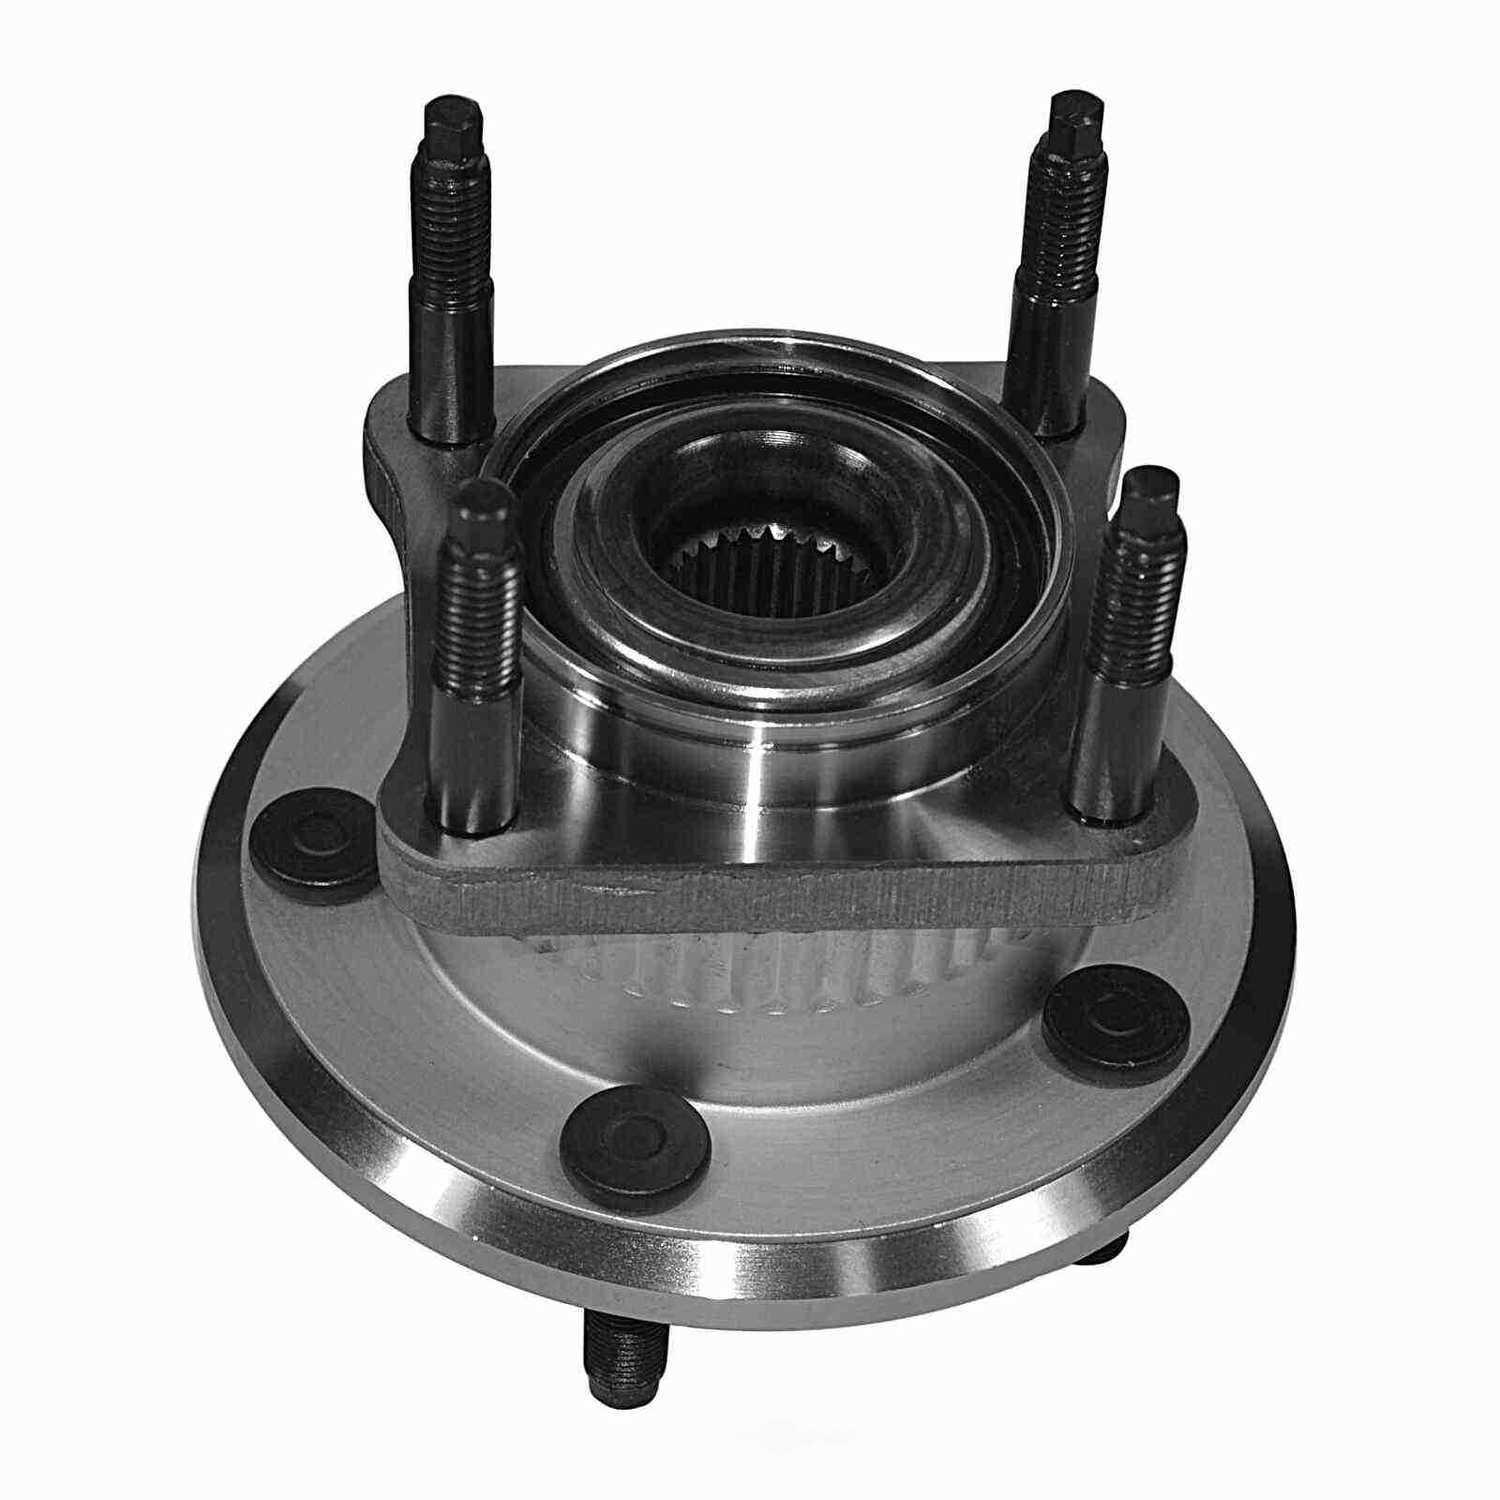 GSP NORTH AMERICA INC. - GSP New Wheel Bearing and Hub Assembly (Rear) - AD8 103302